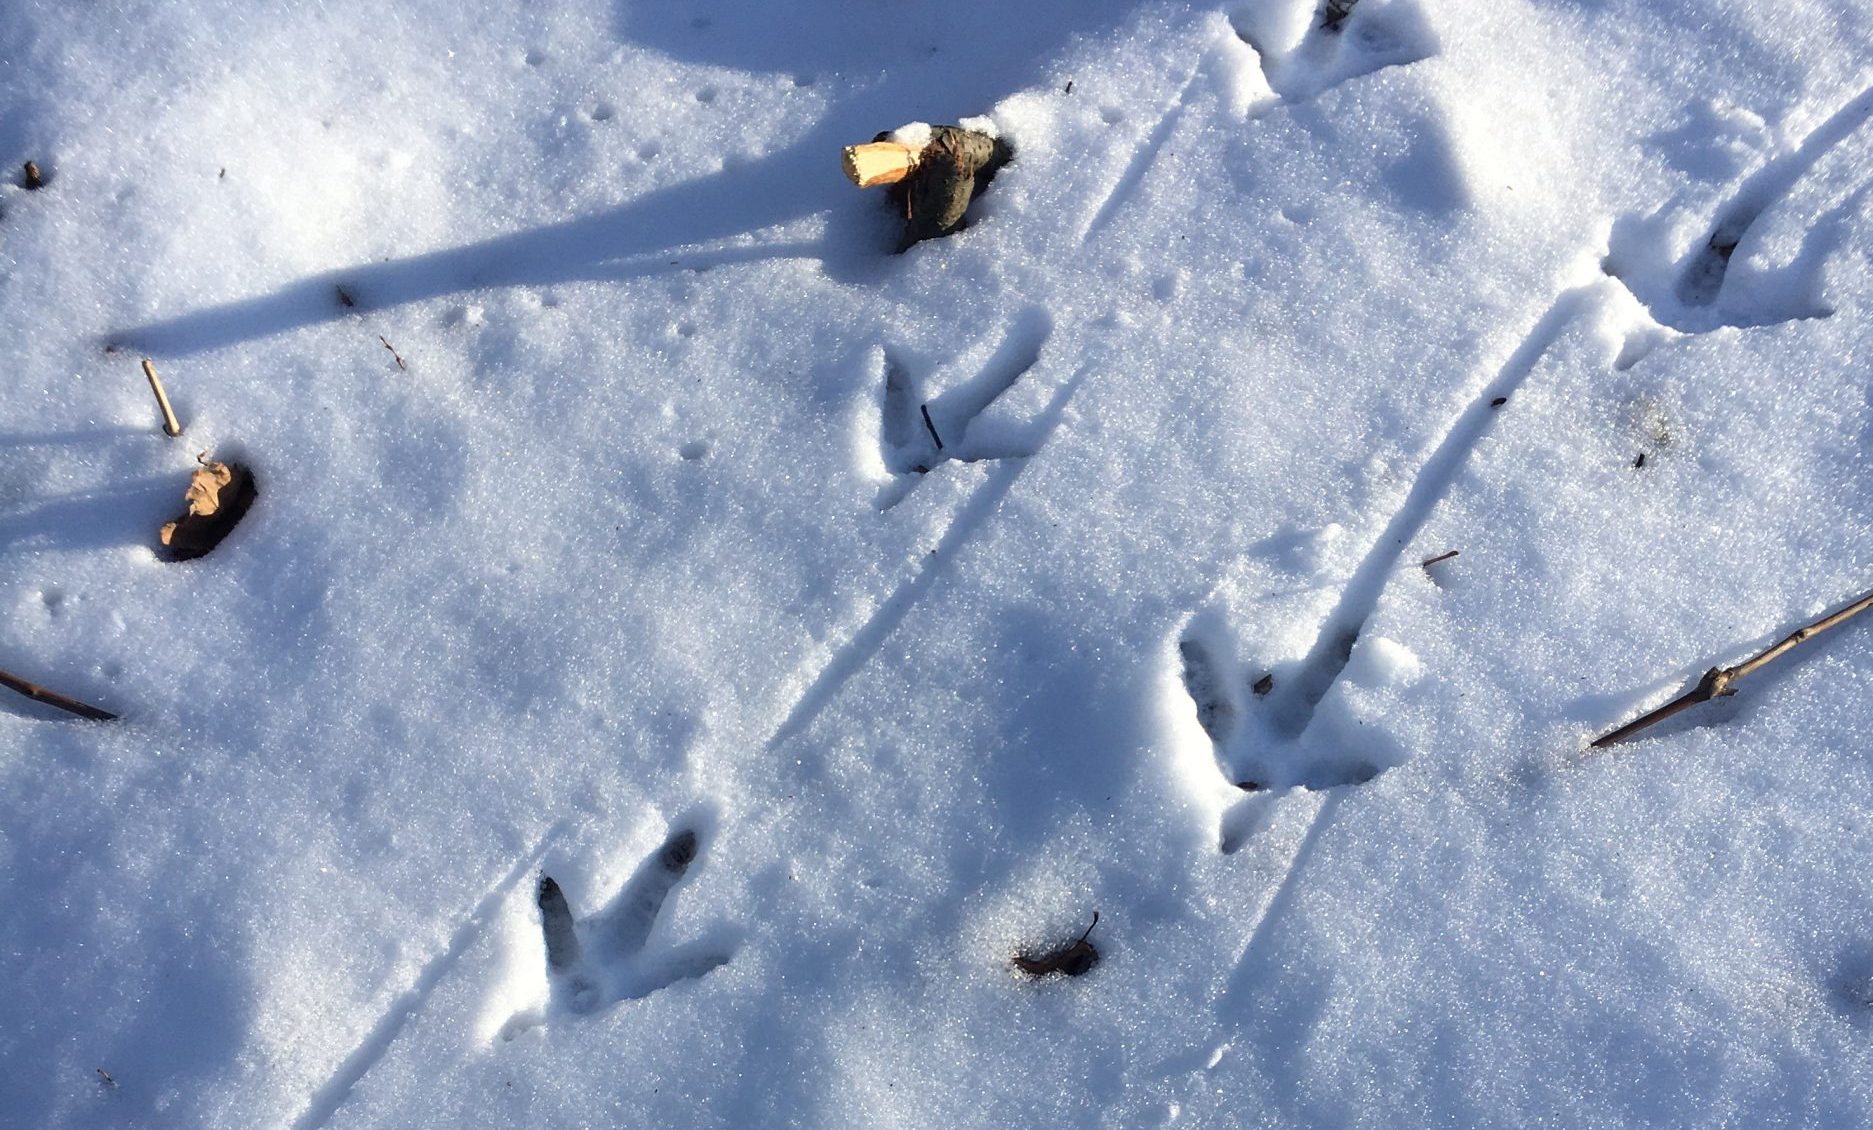 Turkey tracks left in winter snow. Five prints are visible.